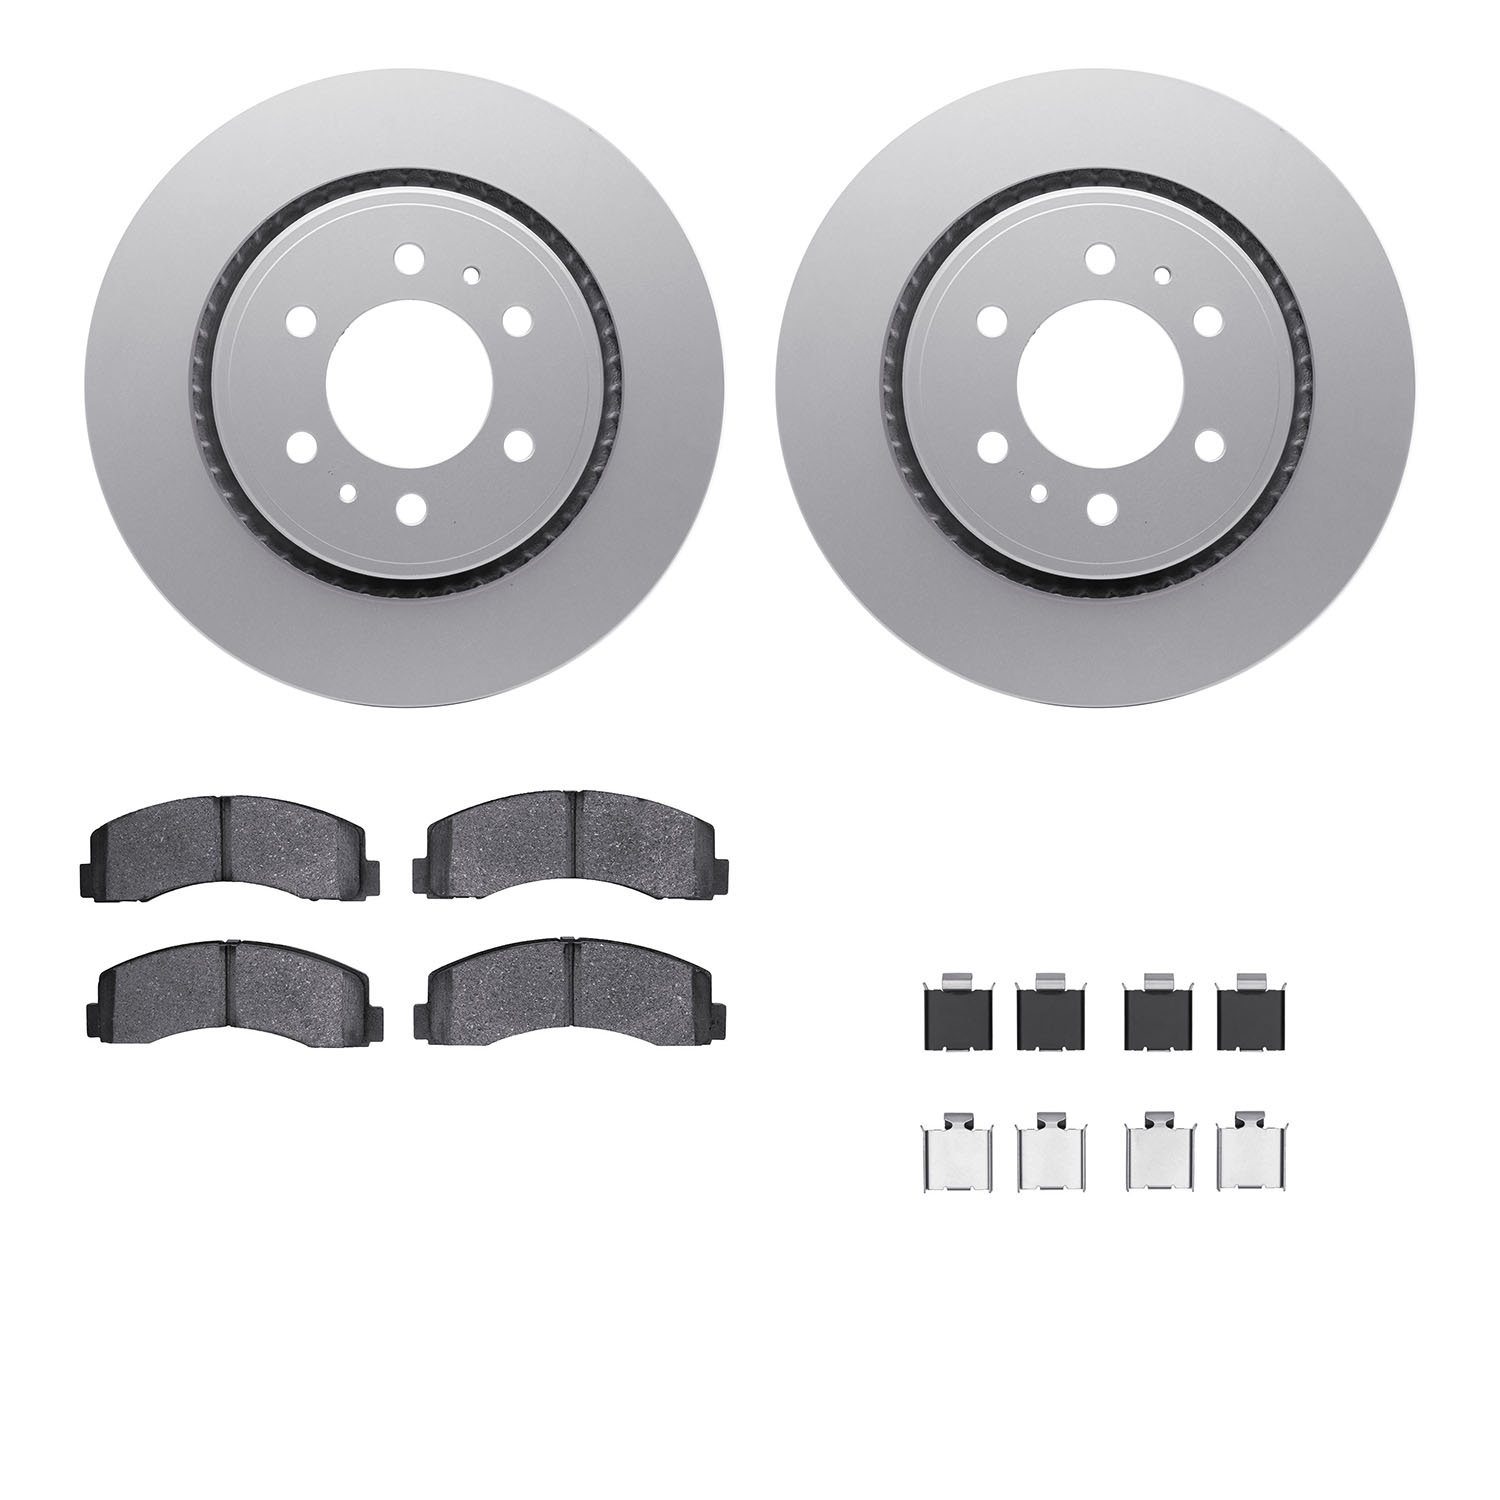 4412-54063 Geospec Brake Rotors with Ultimate-Duty Brake Pads & Hardware, 2010-2021 Ford/Lincoln/Mercury/Mazda, Position: Front